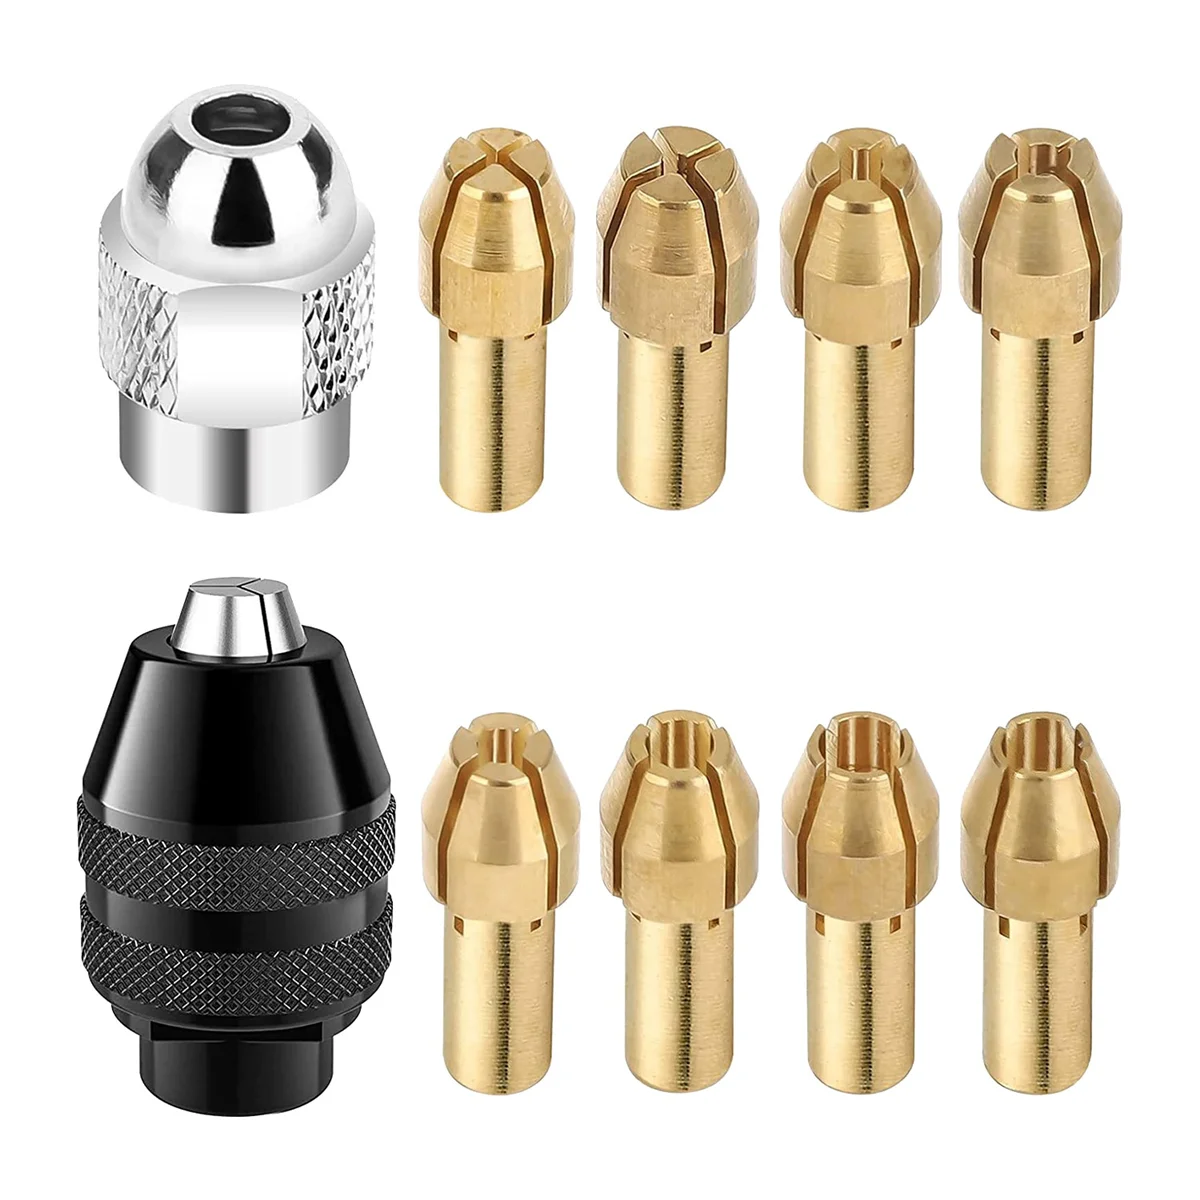 

8Pcs Brass Collet Set with Keyless Drill Chuck, Replacement 4485 Brass Quick Change Rotary Drill Nut Tool Set